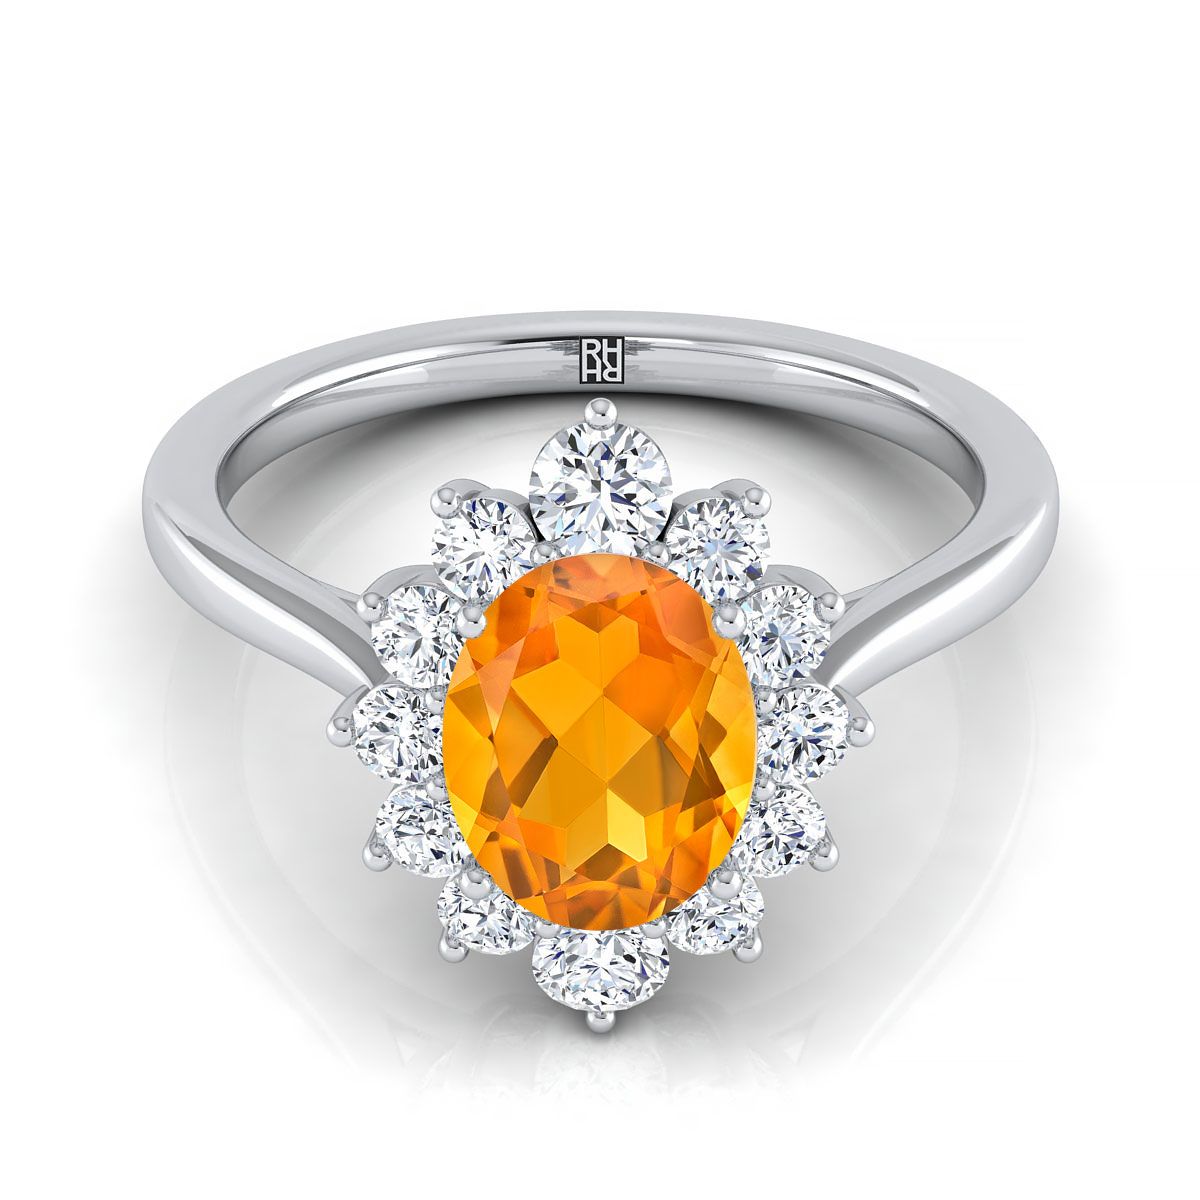 14K White Gold Oval Citrine Floral Diamond Halo Engagement Ring -1/2ctw